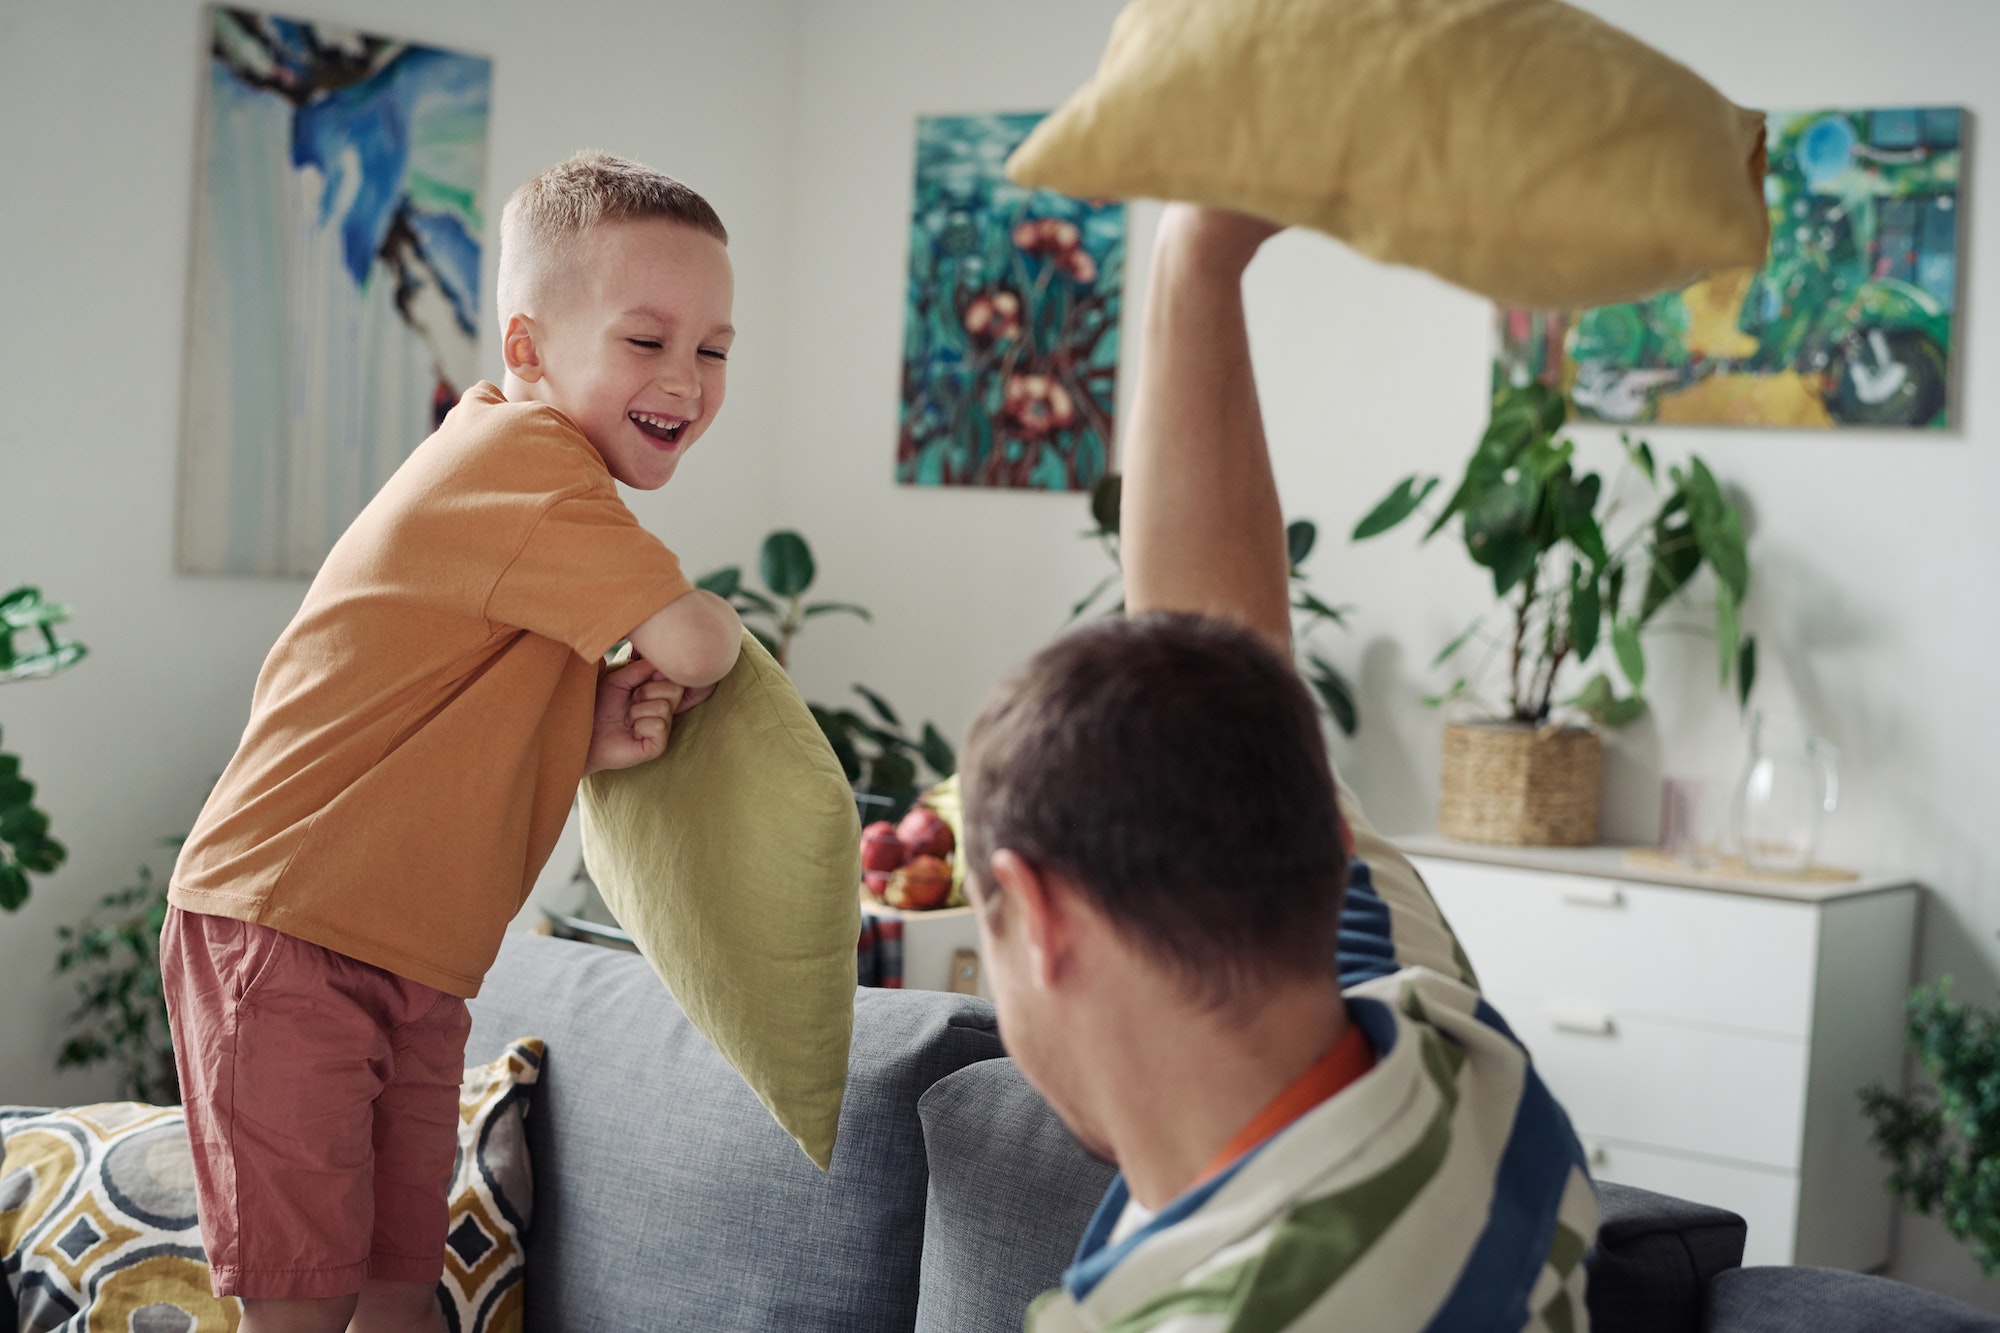 Son playing pillow fight with dad